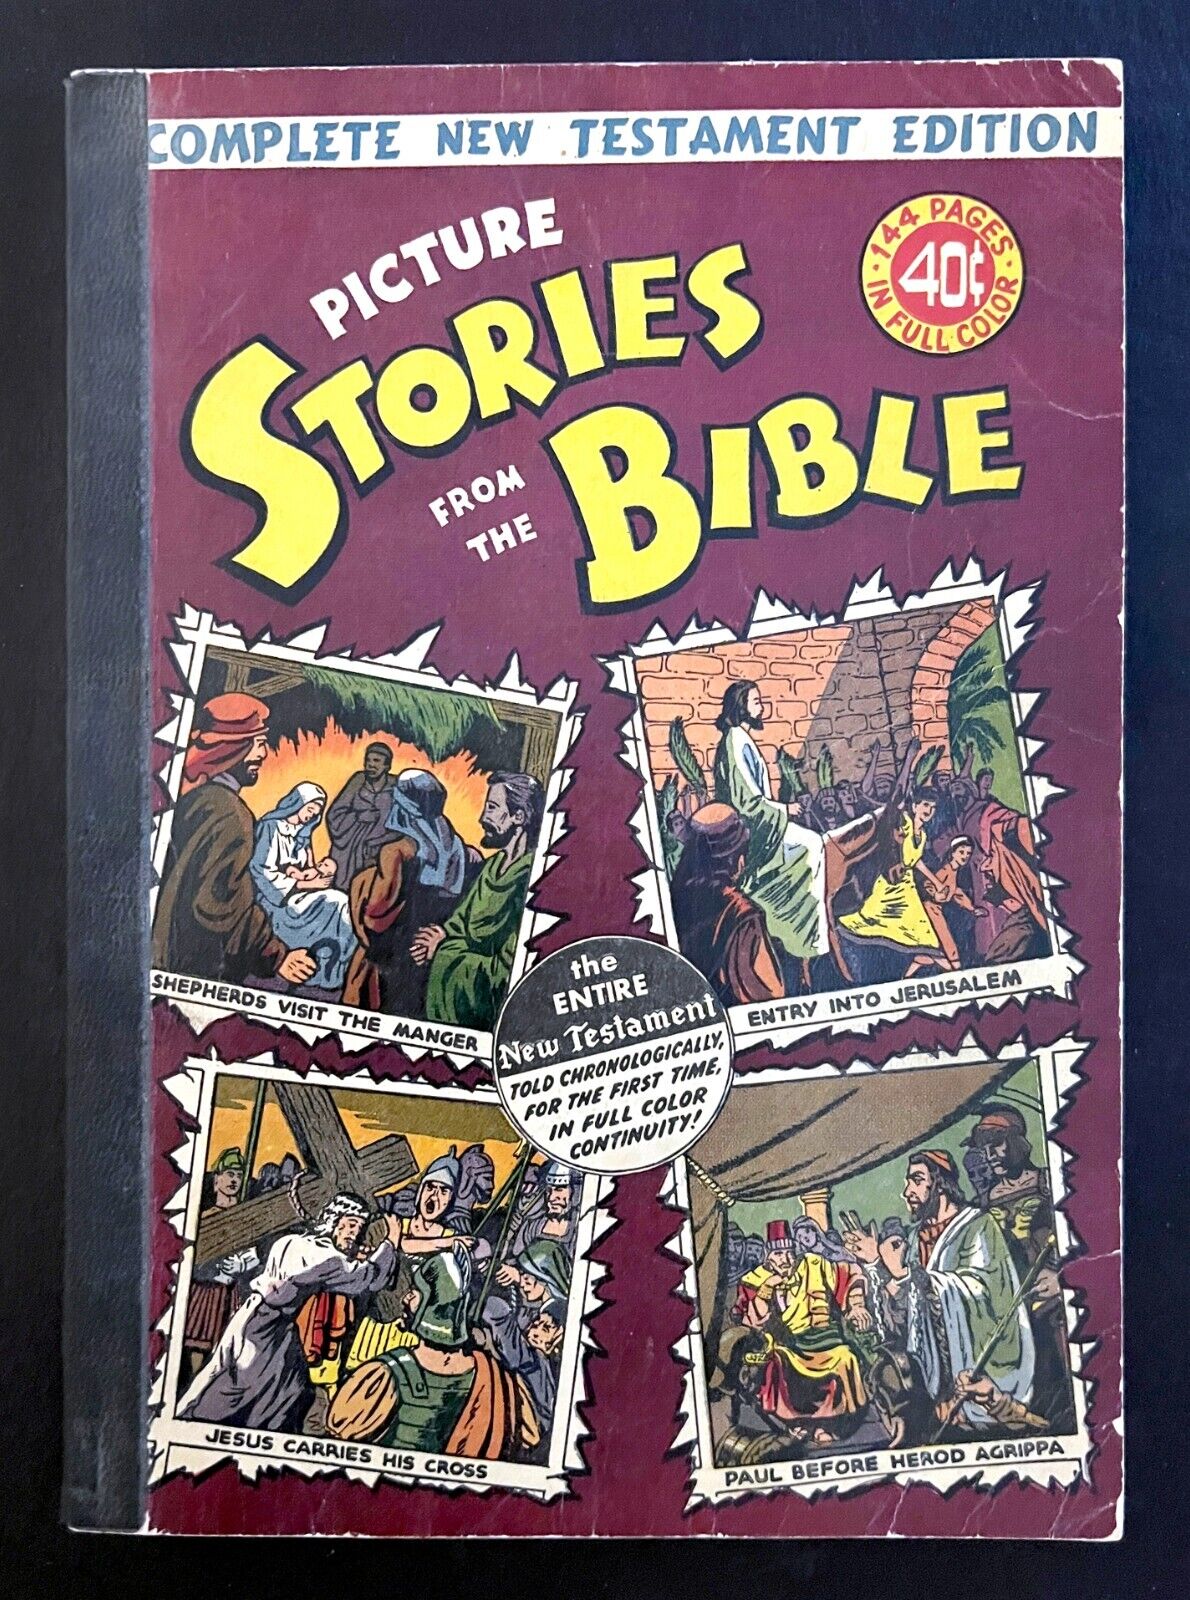 PICTURE STORIES FROM THE BIBLE: COMPLETE NEW TESTAMENT 1946 EC Comics 40¢ 144 Pg